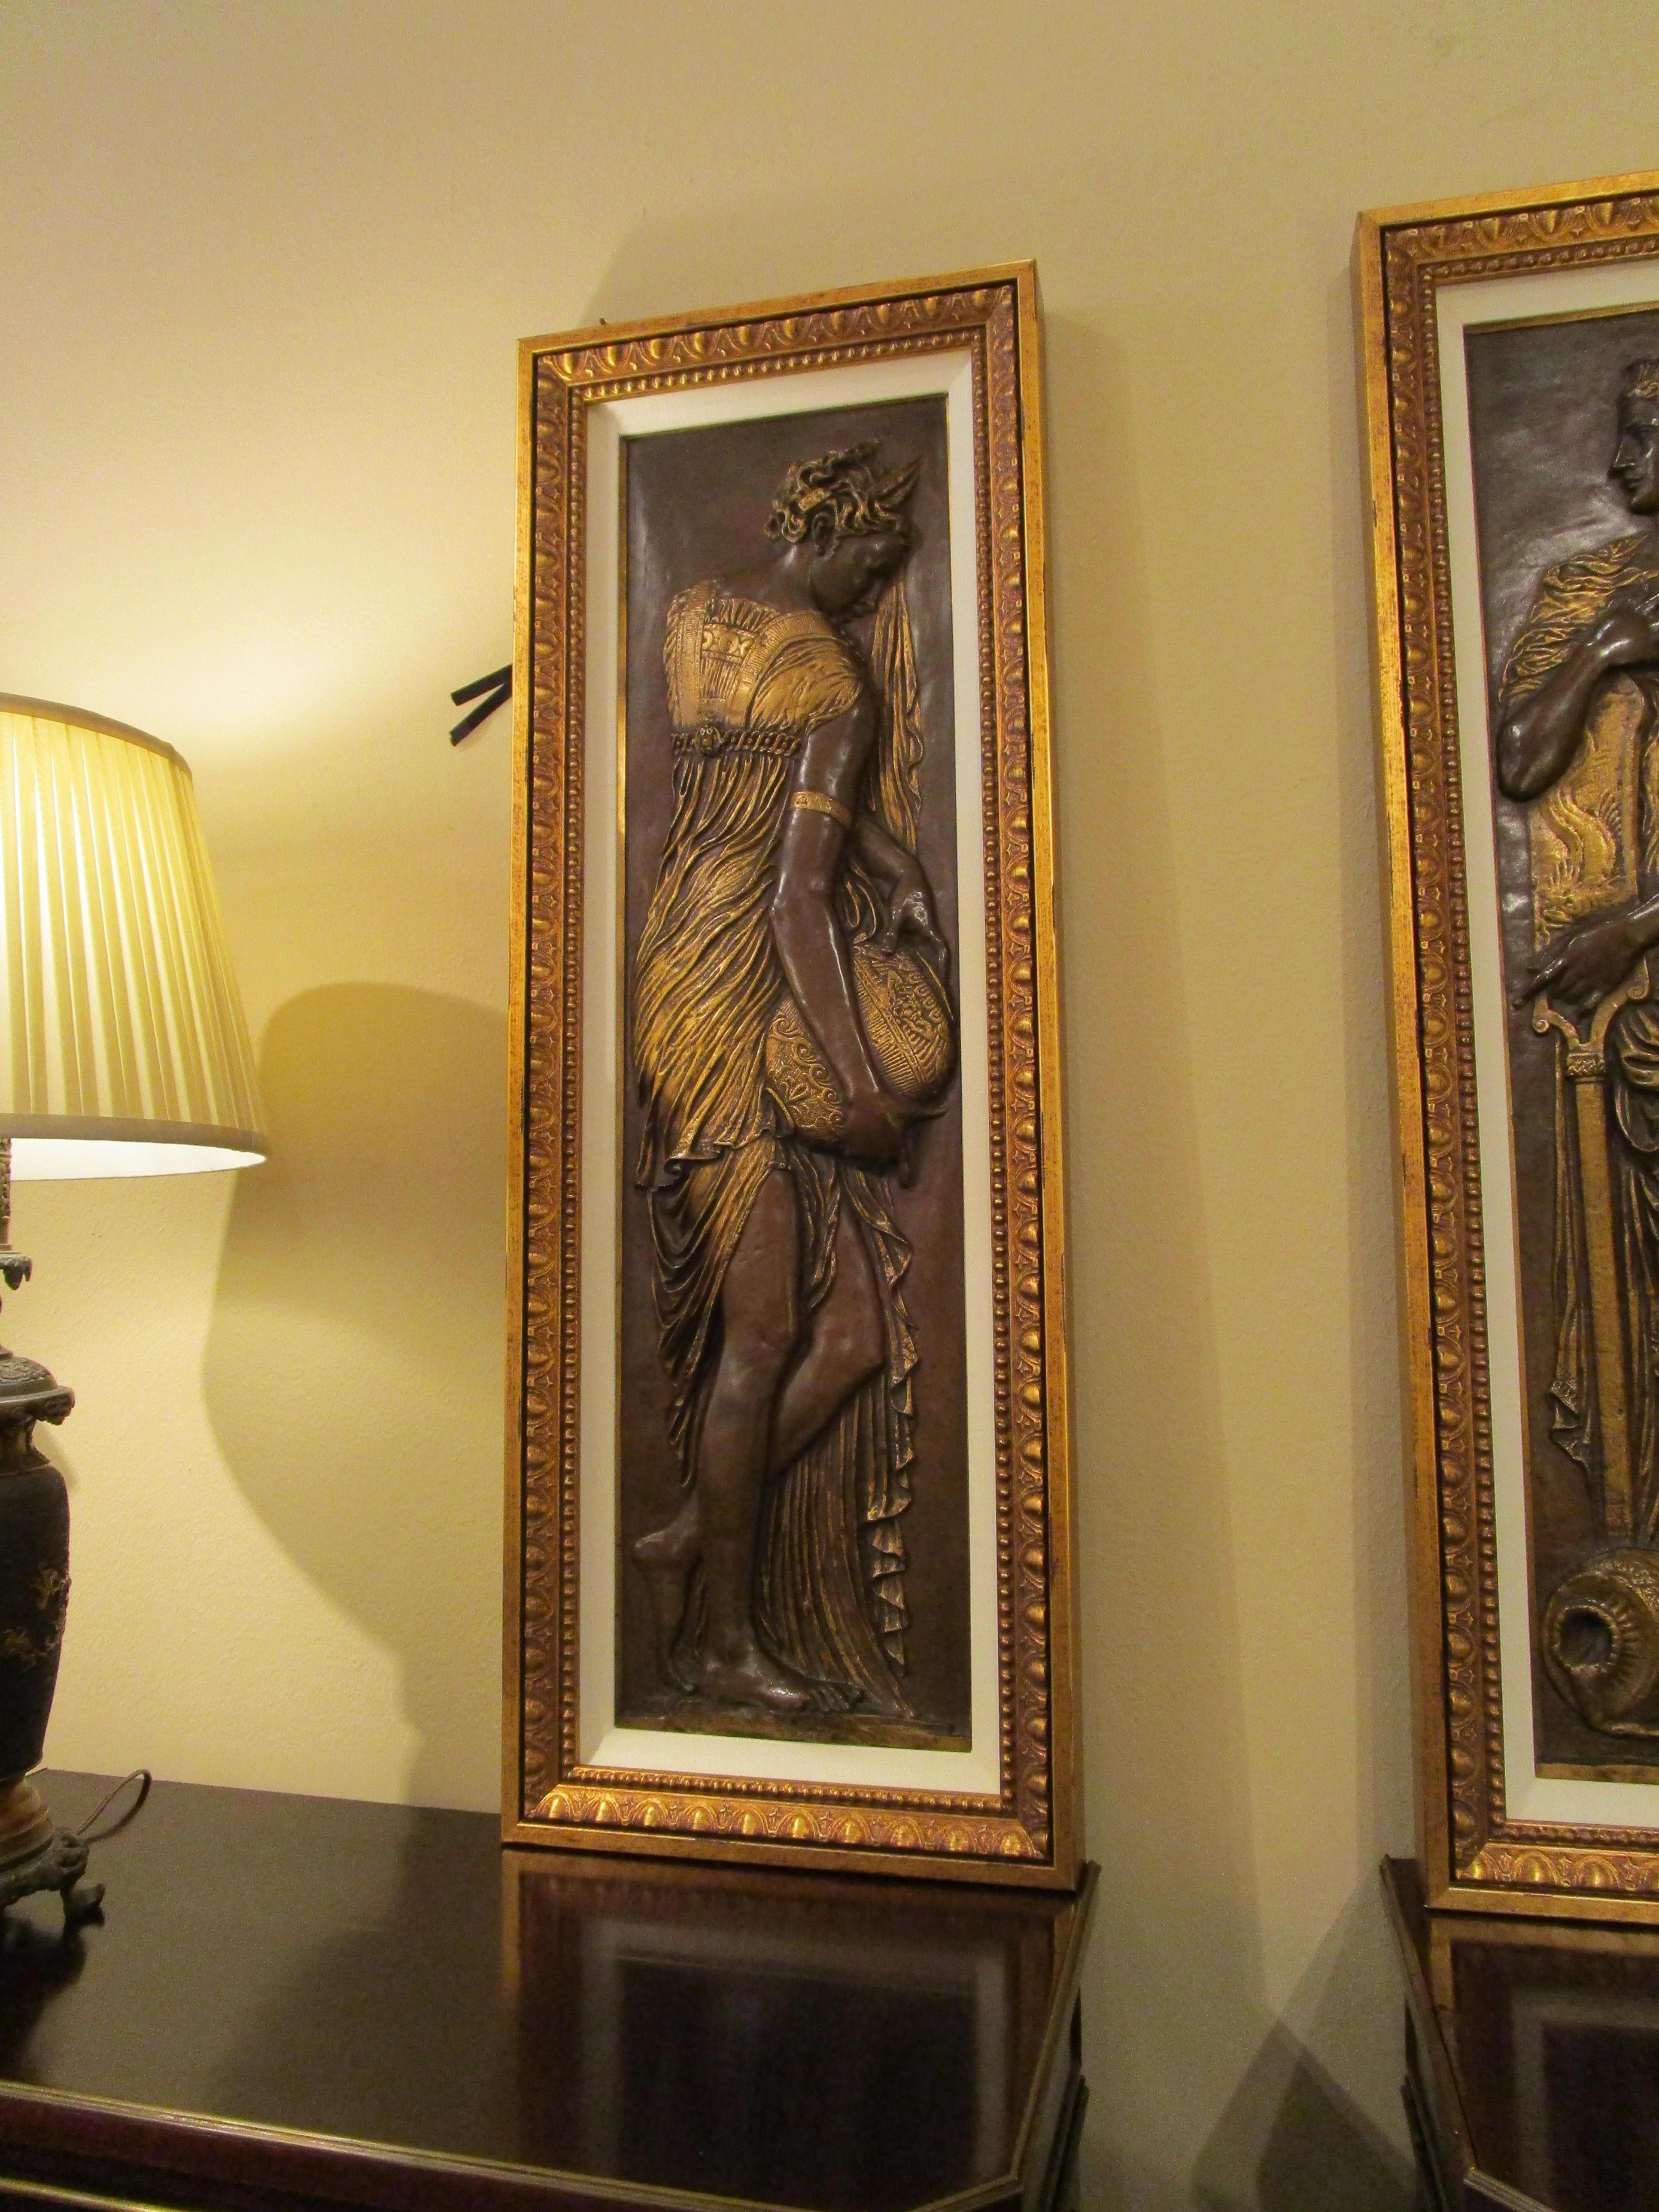 A fine large pair of 19th century French bronze relief plaques signed F. Barbedienne. Custom framed and matted.